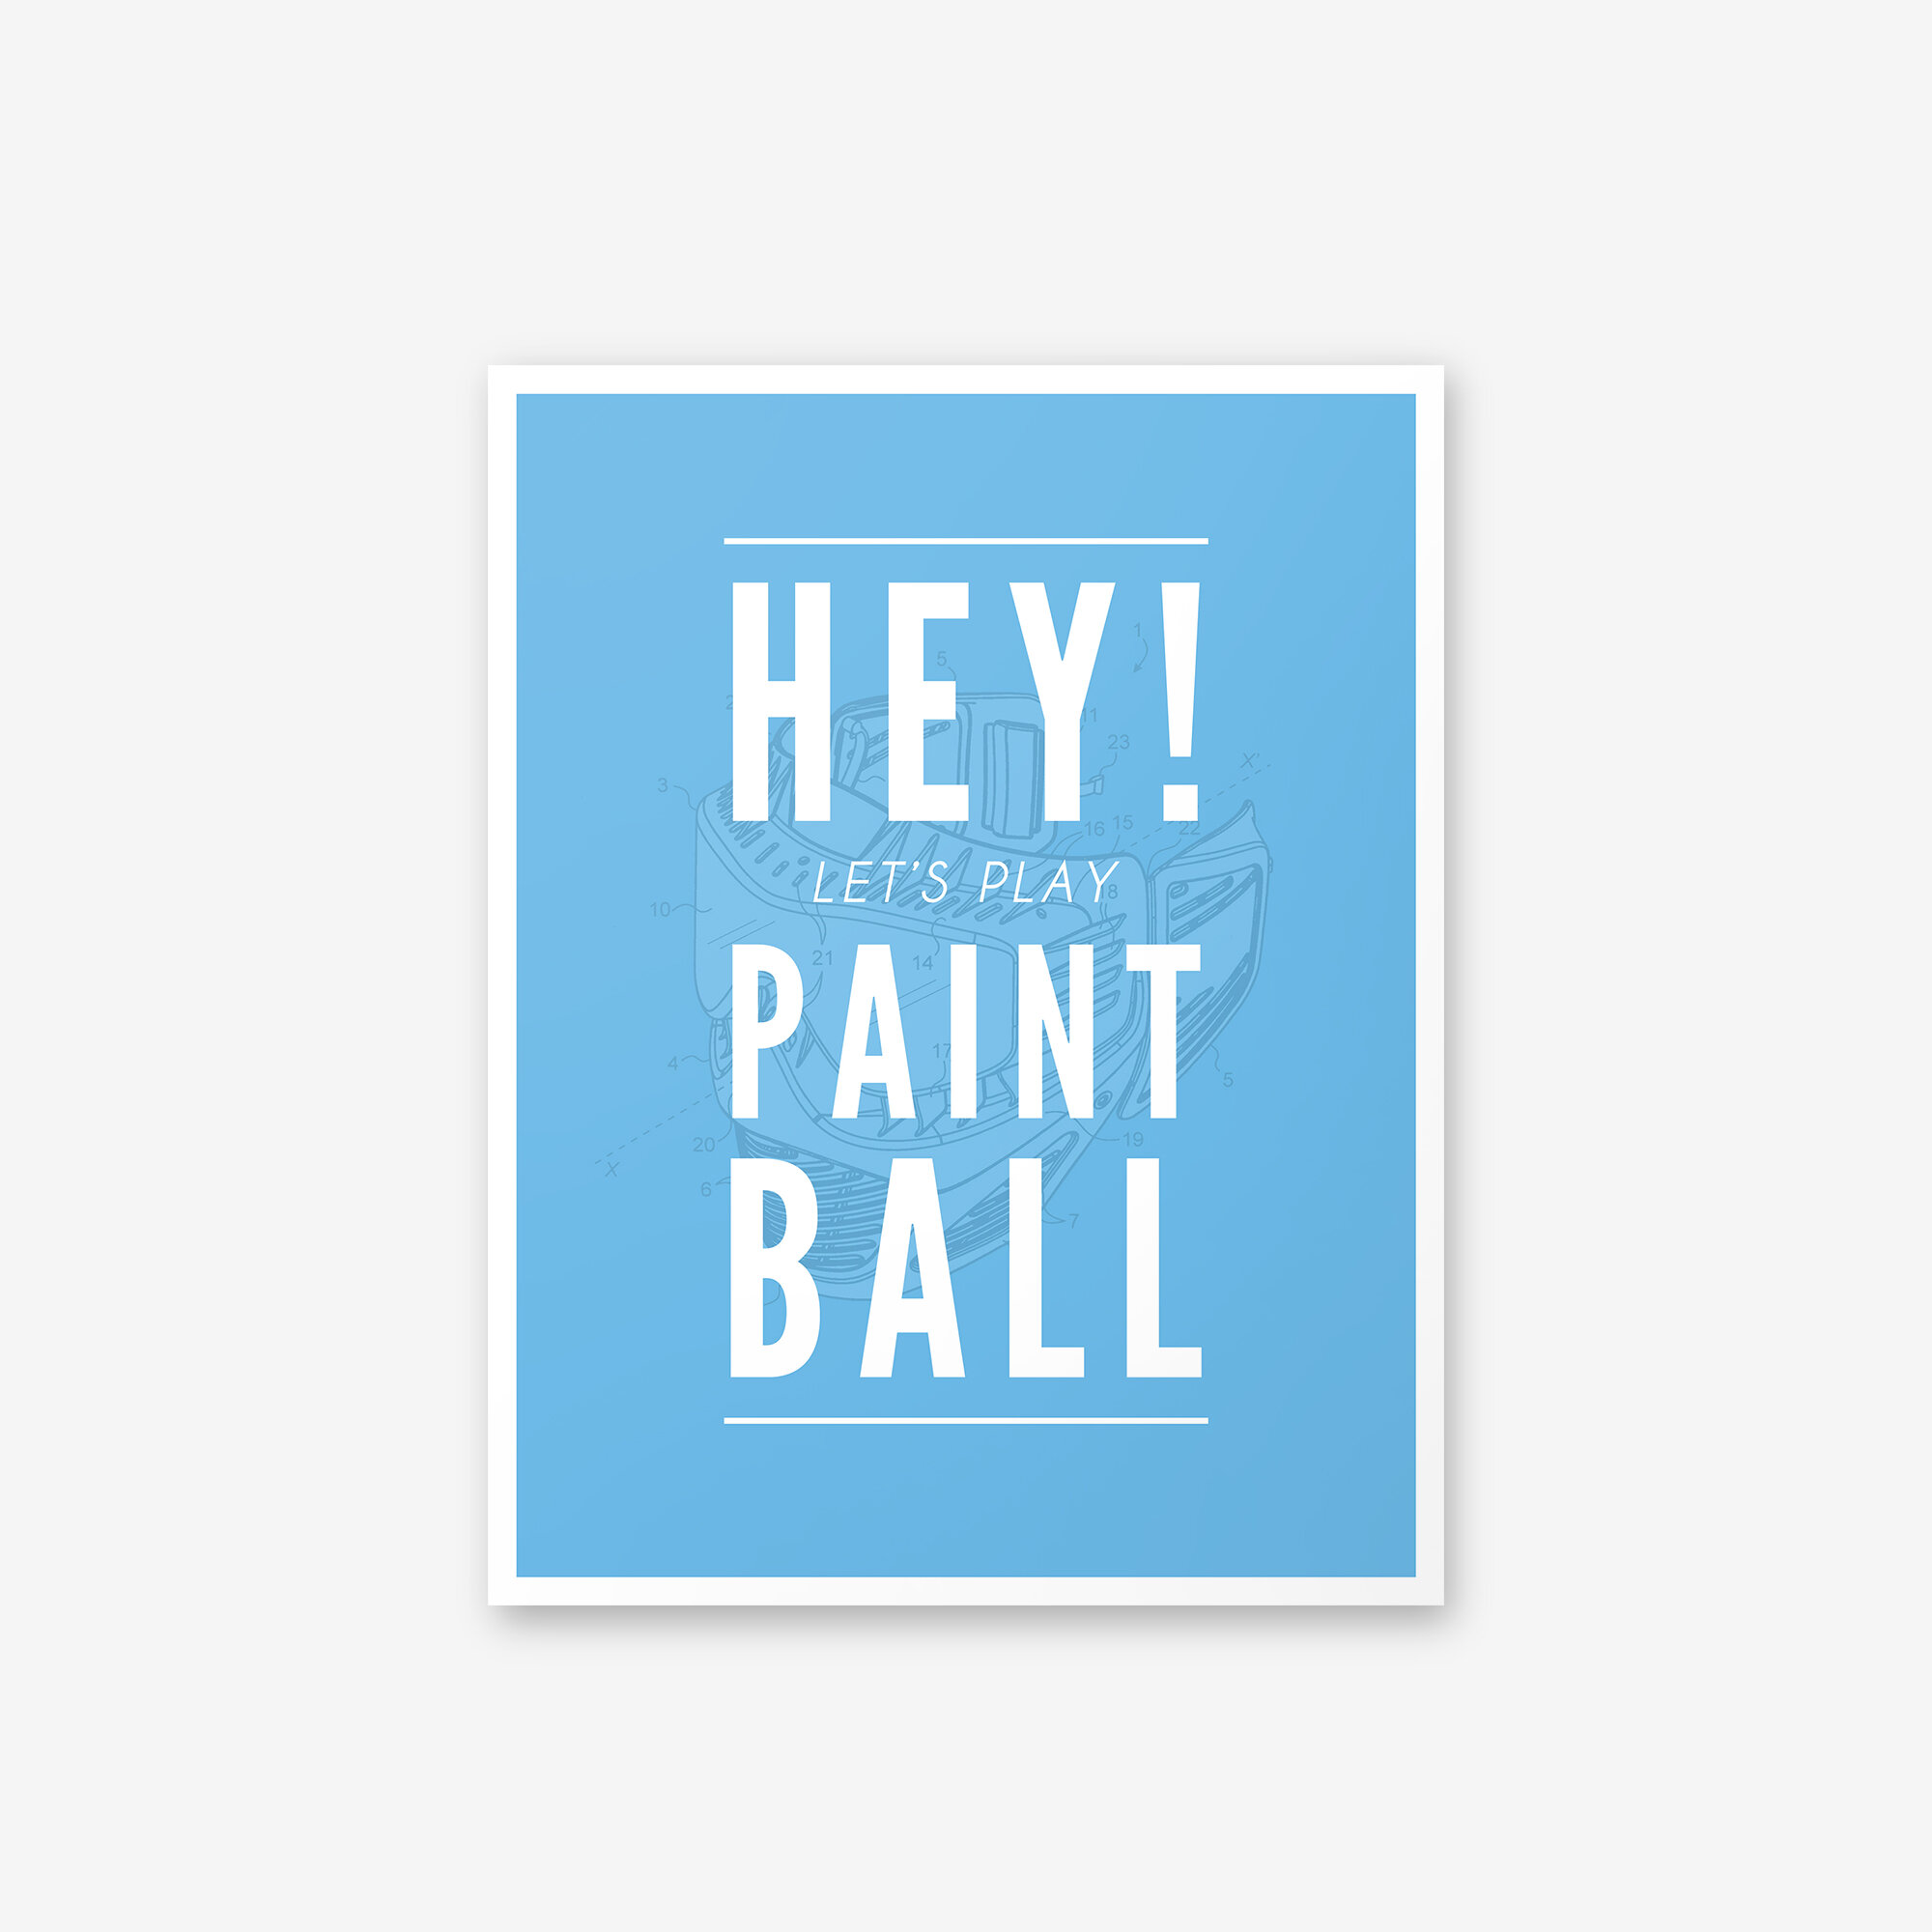 BVH_Posters_Crazy+Zone_Paint+Ball.jpg